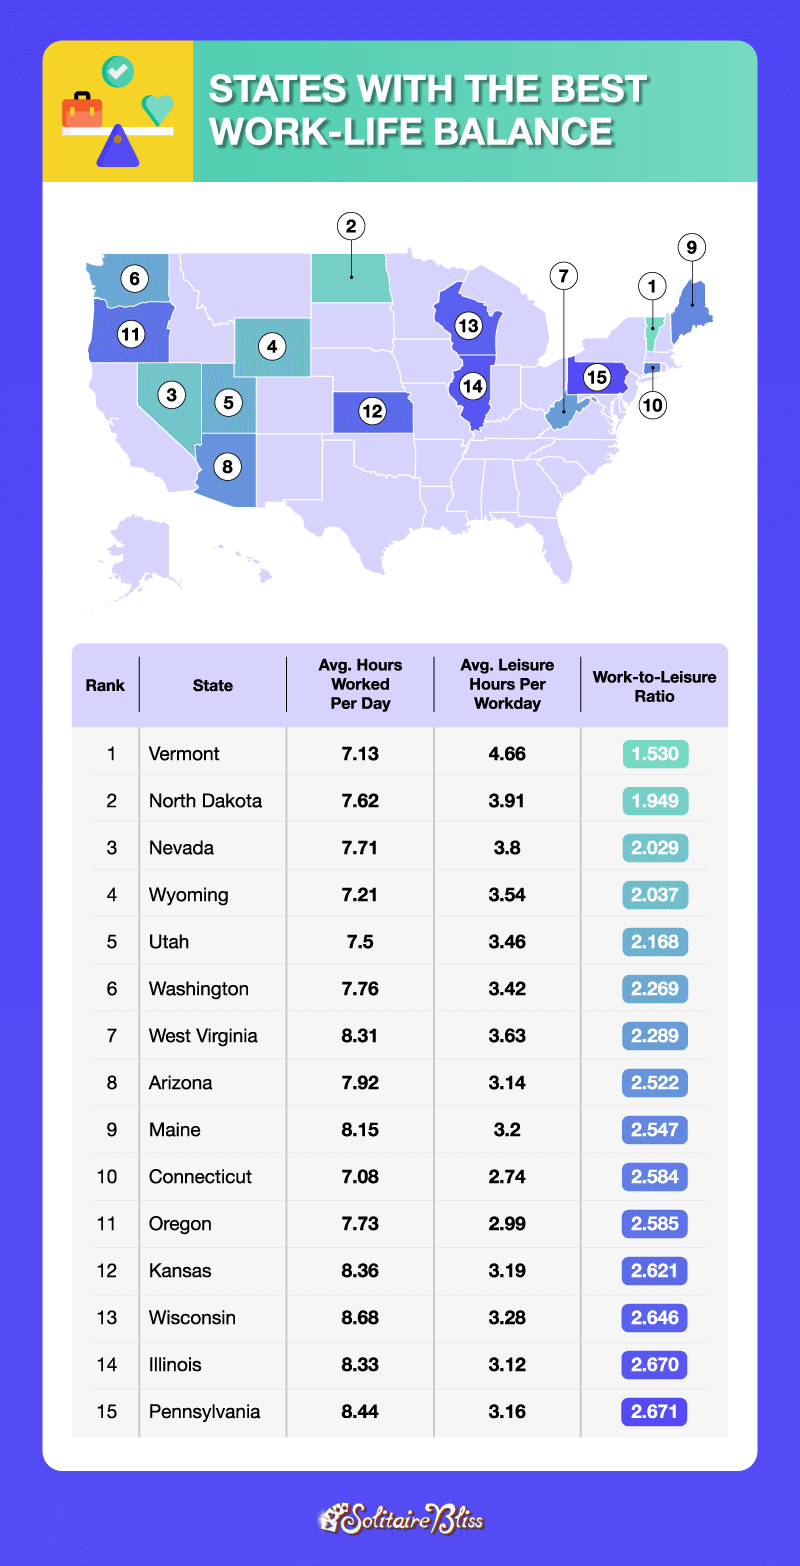 states with the worst work-life balance